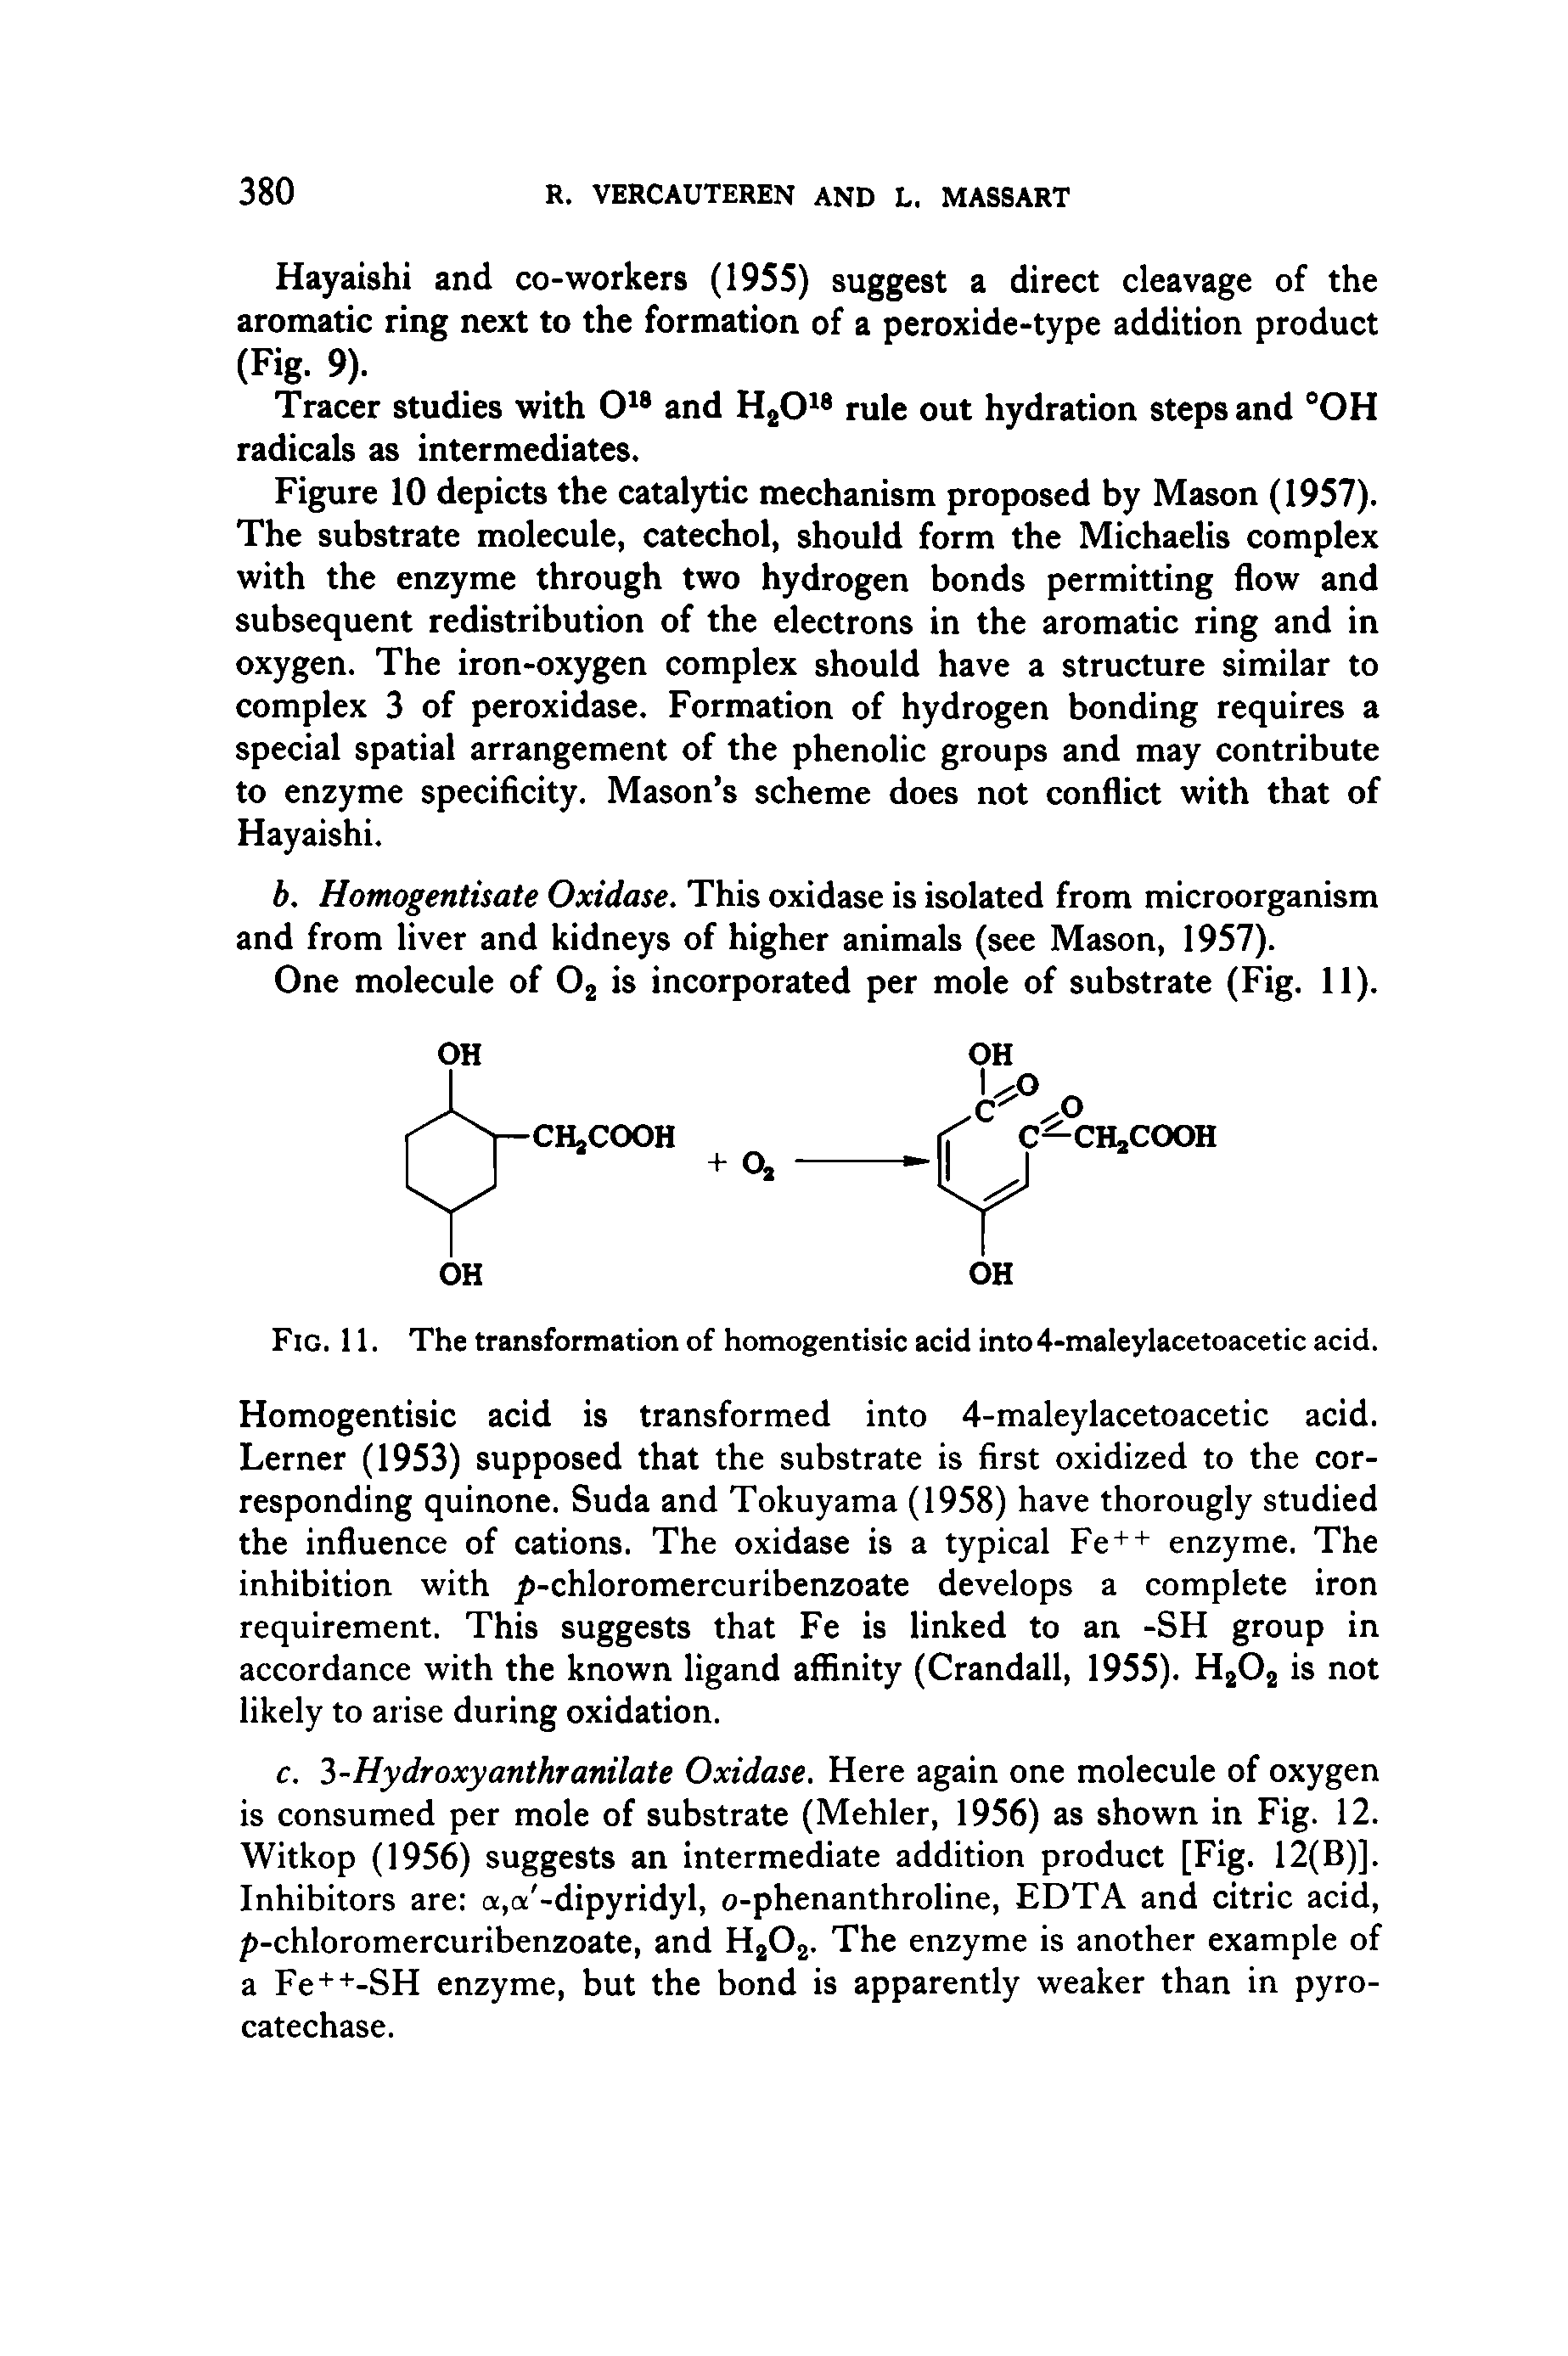 Fig. 11. The transformation of homogentisic acid into4-maleylacetoacetic acid.